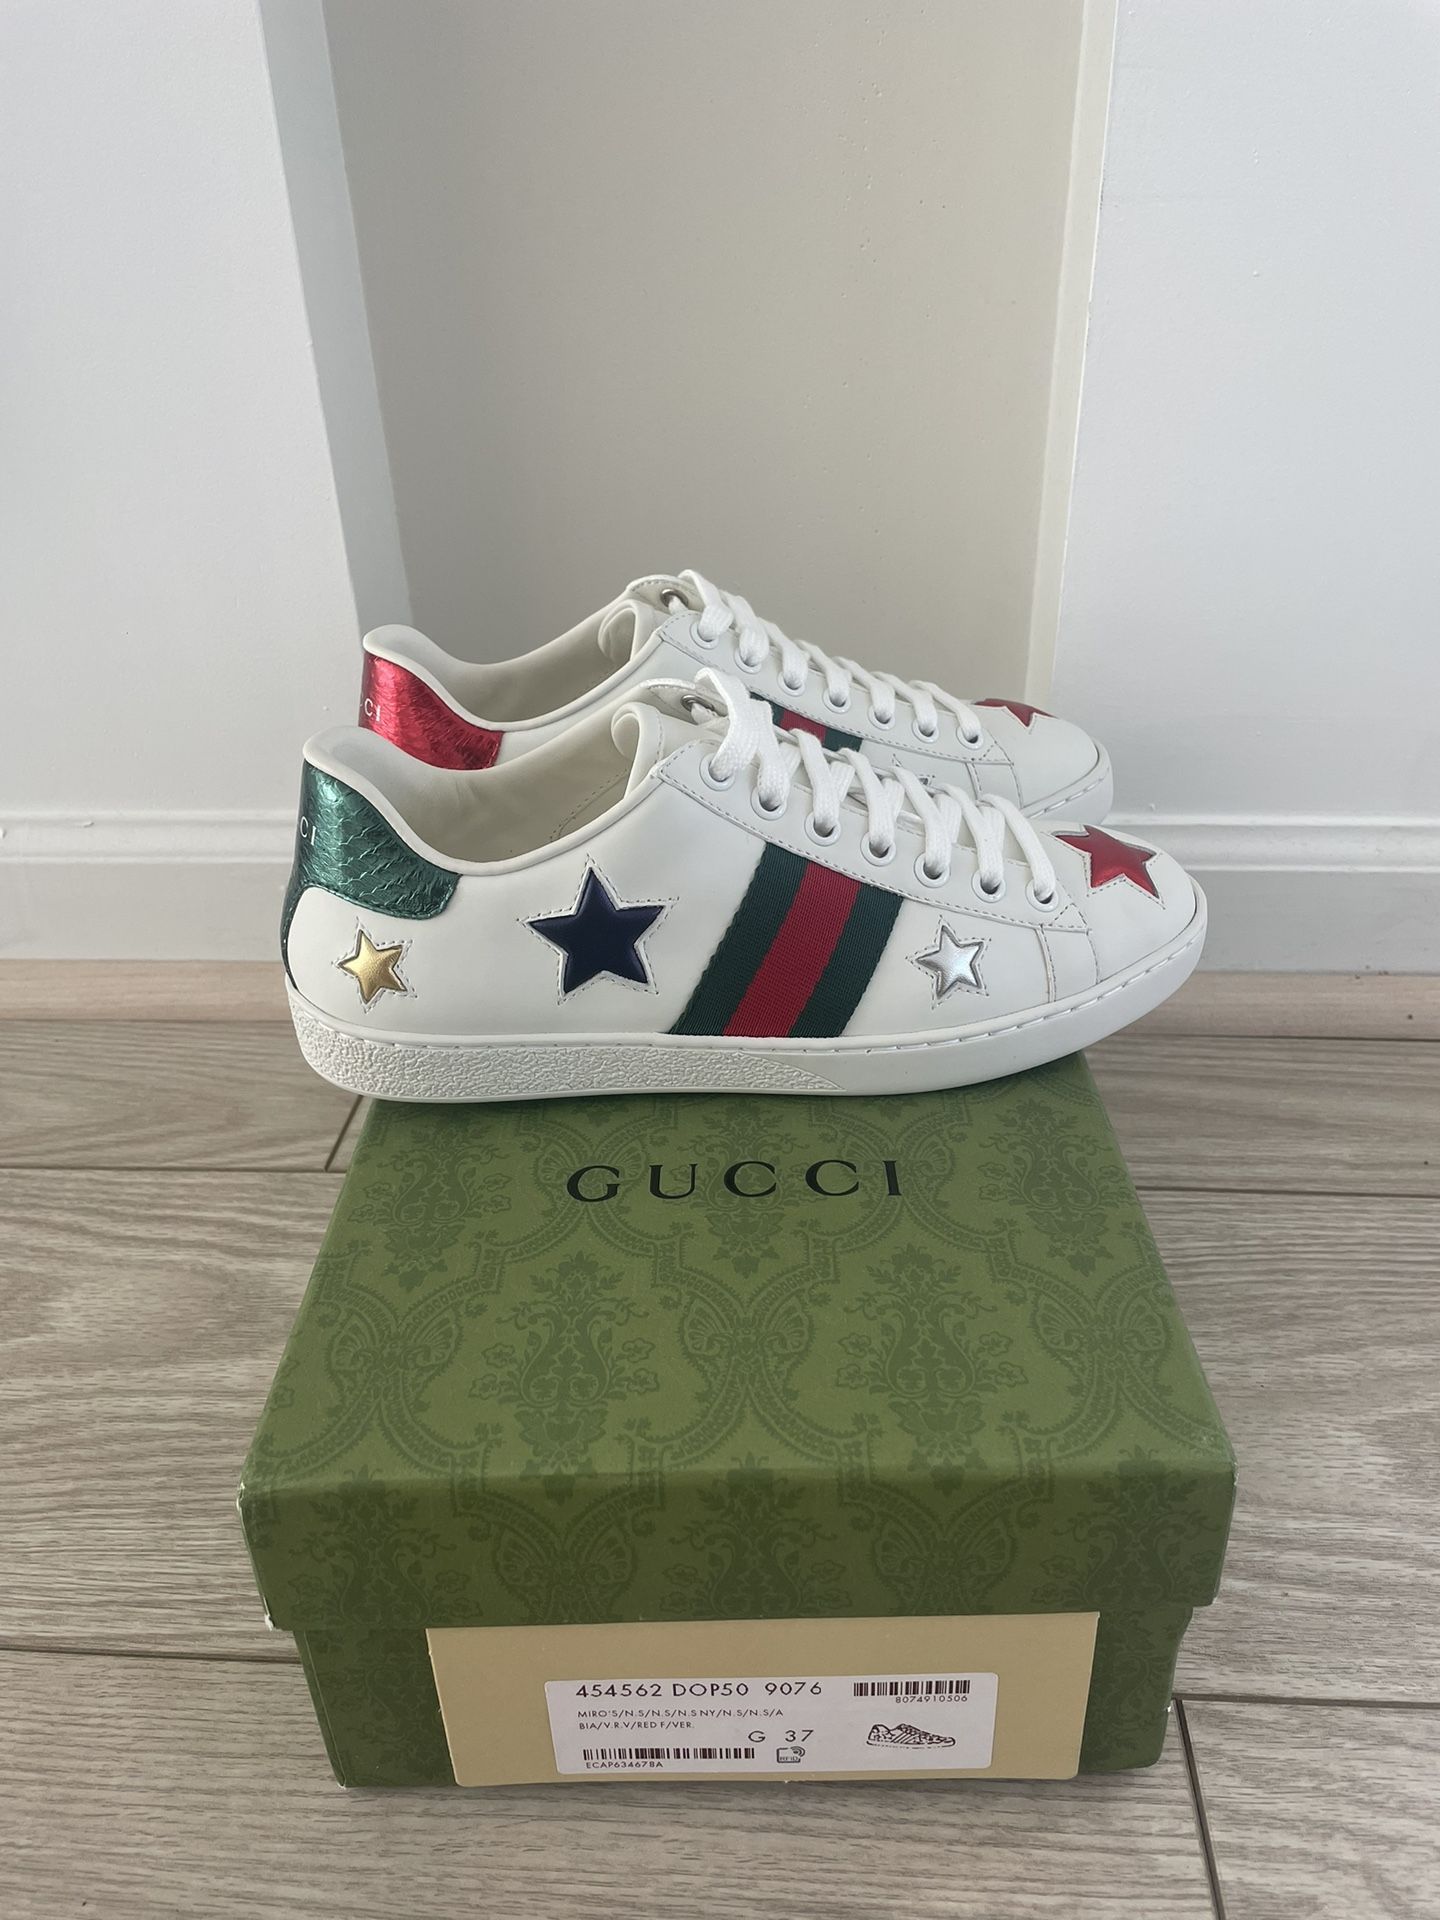 Gucci Women’s Ace Sneakers Stars Size 37 (7)